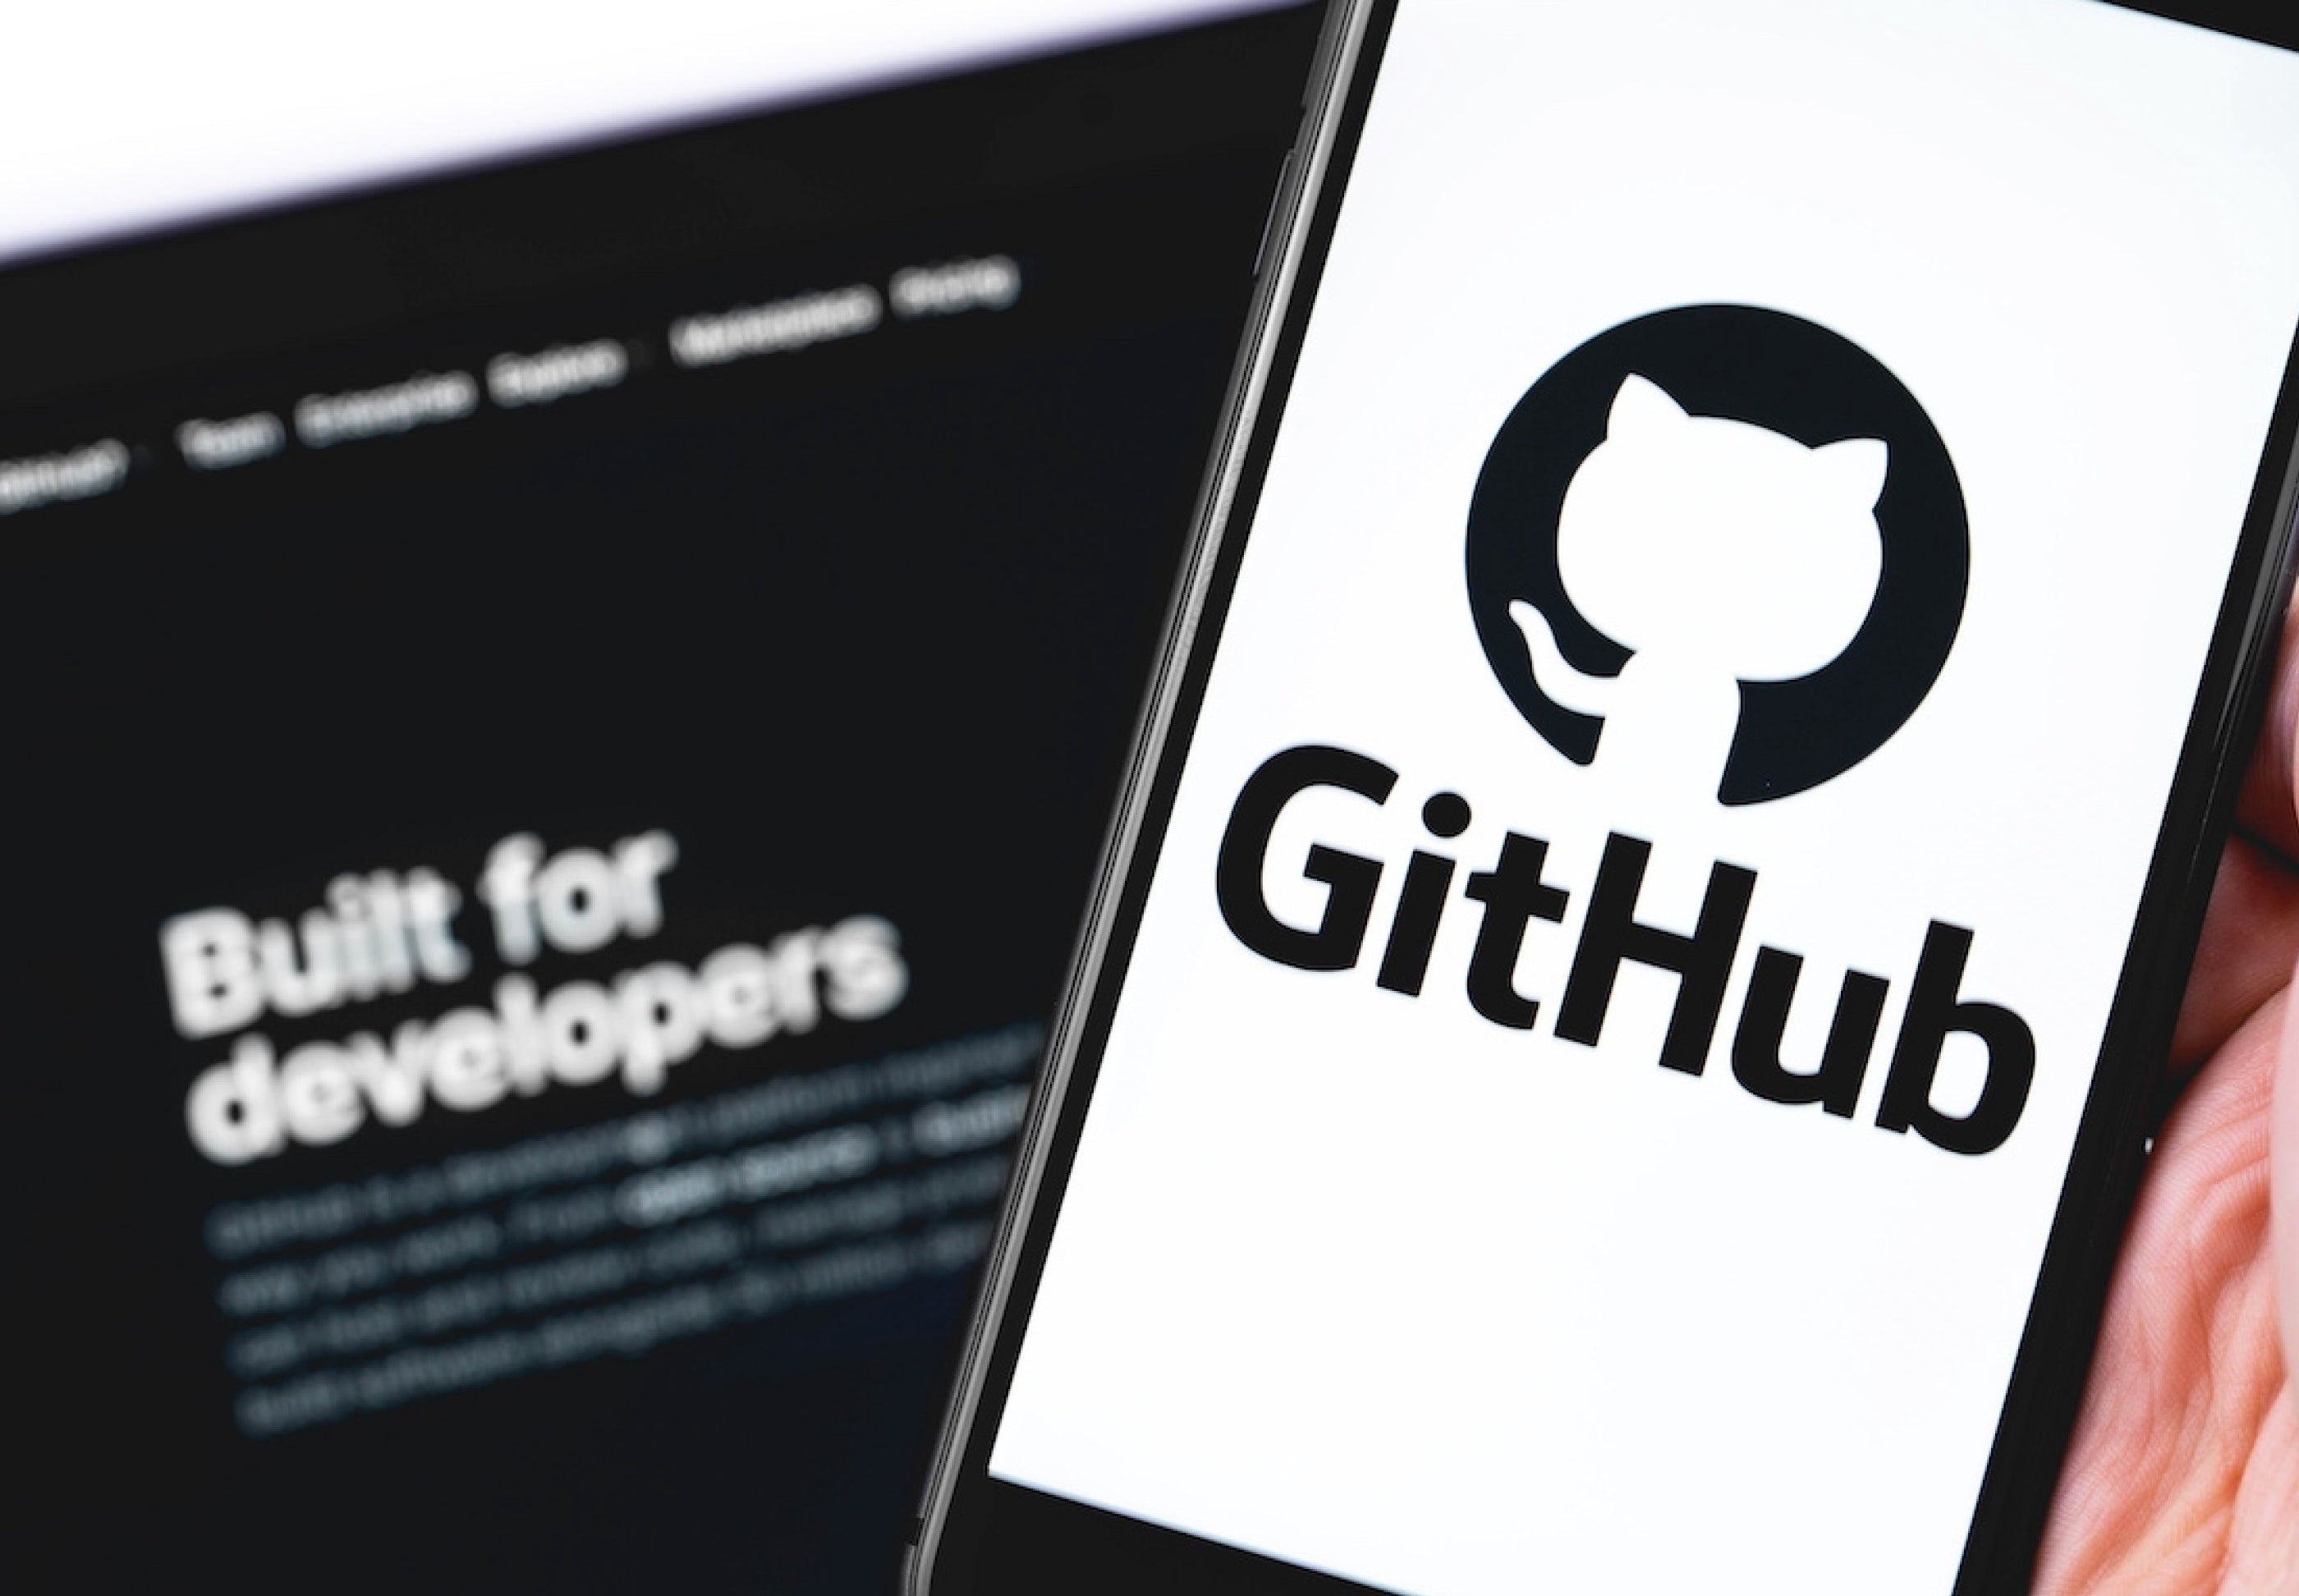 GitHub alerts users: limited functionality ahead for those without two-factor authentication